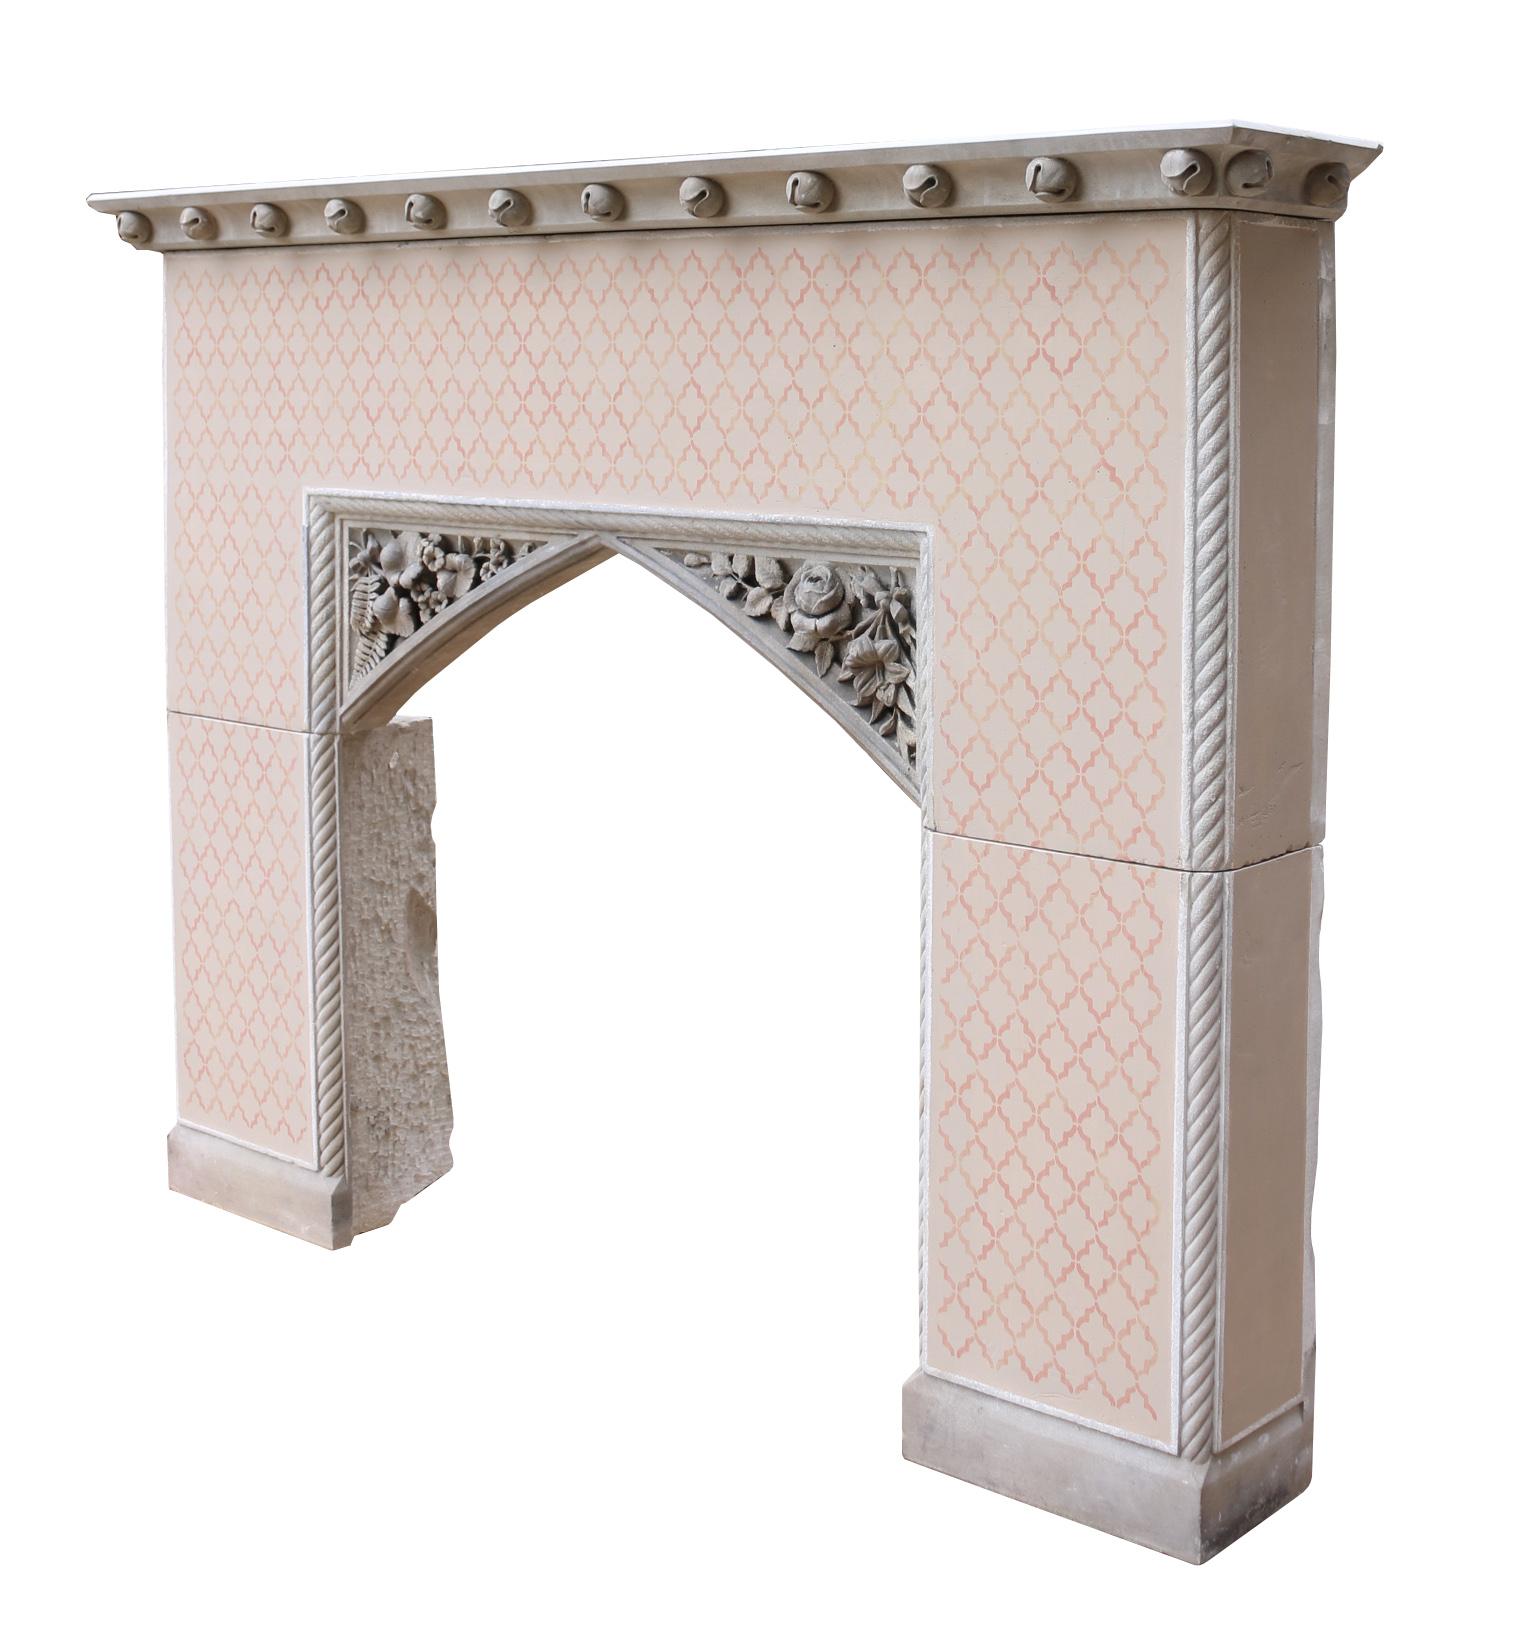 Sandstone Gothic Revival Fire Surround For Sale